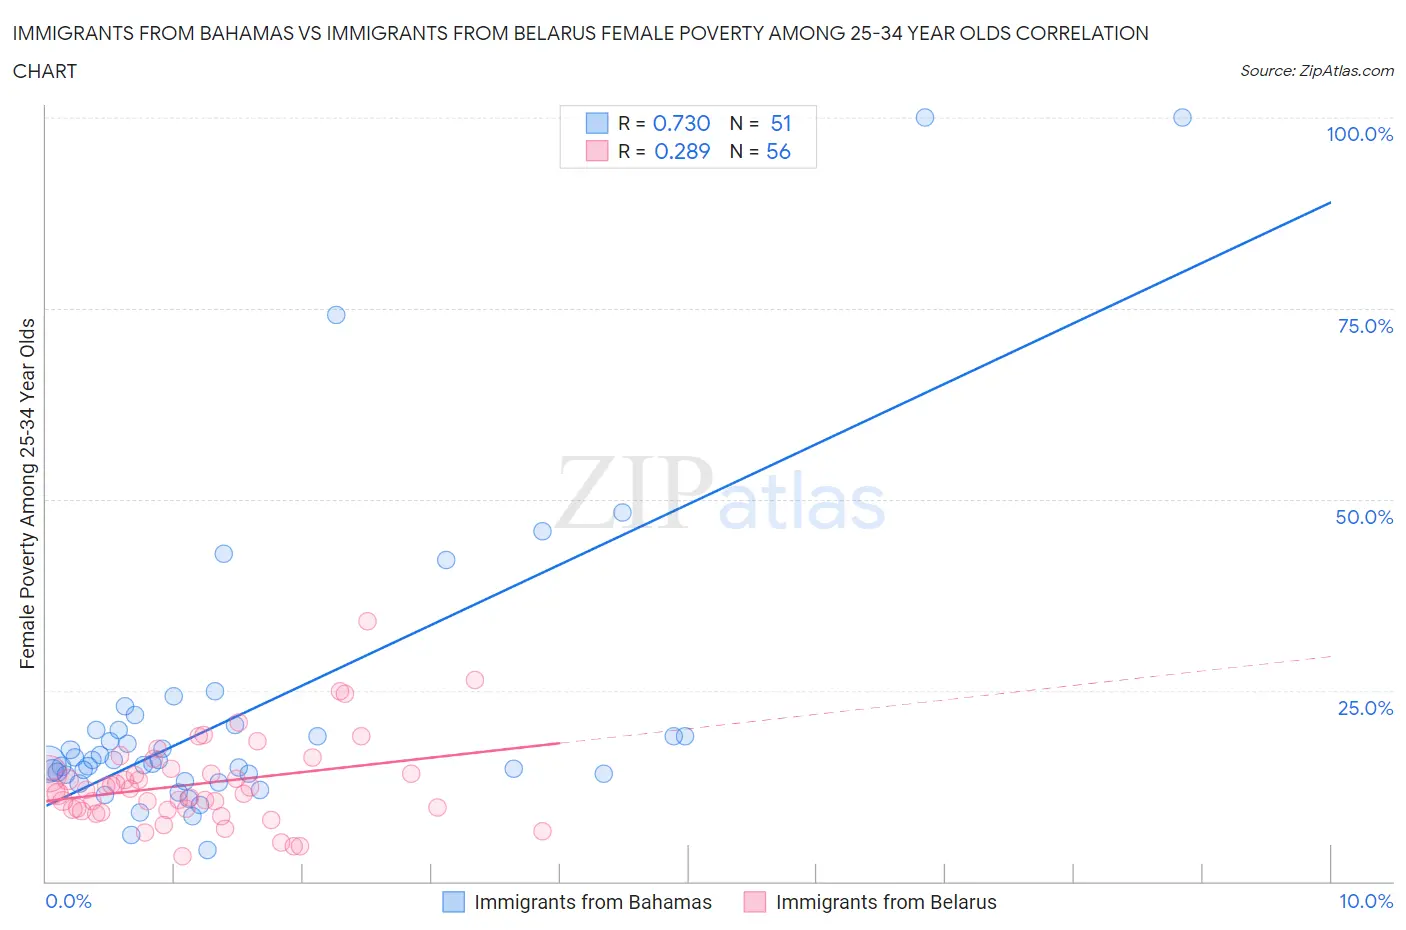 Immigrants from Bahamas vs Immigrants from Belarus Female Poverty Among 25-34 Year Olds